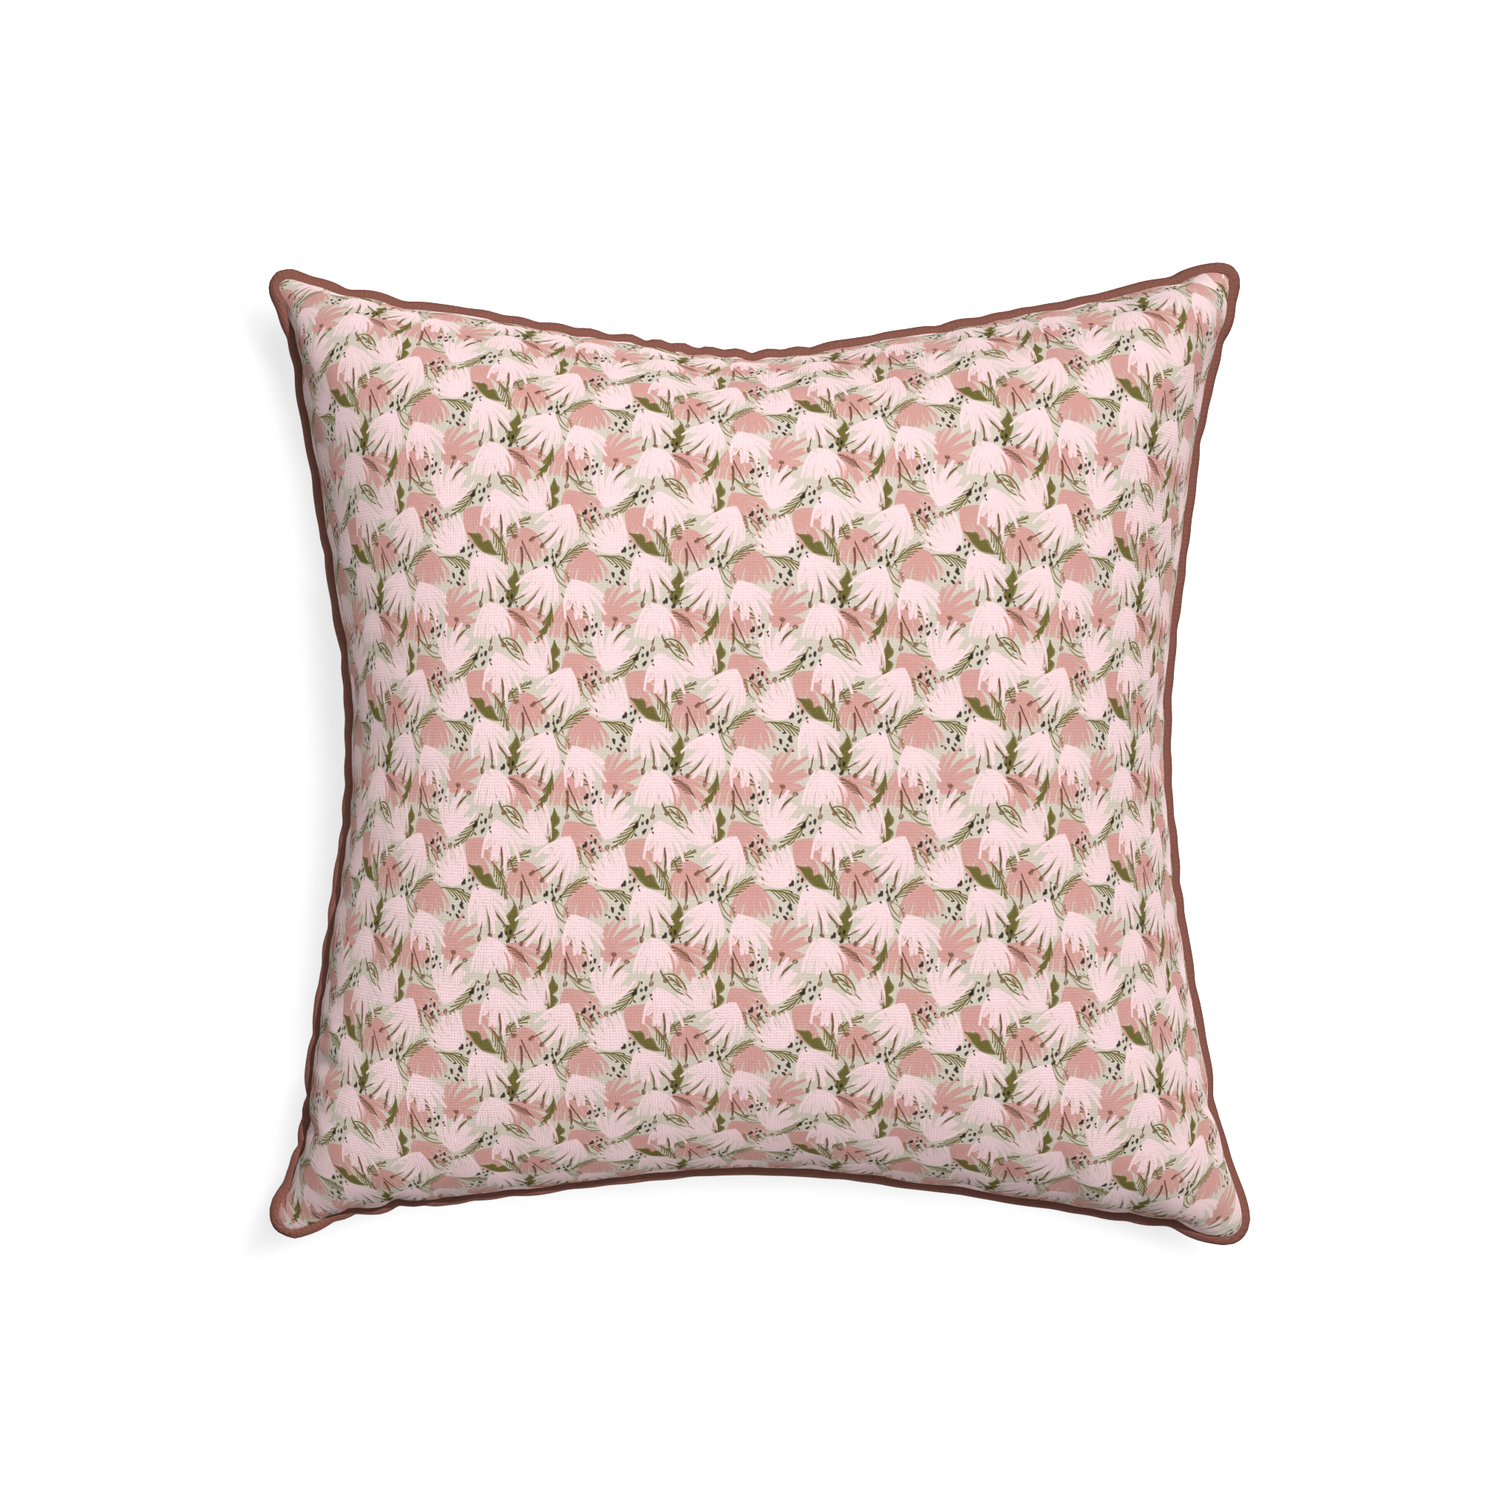 22-square eden pink custom pink floralpillow with w piping on white background